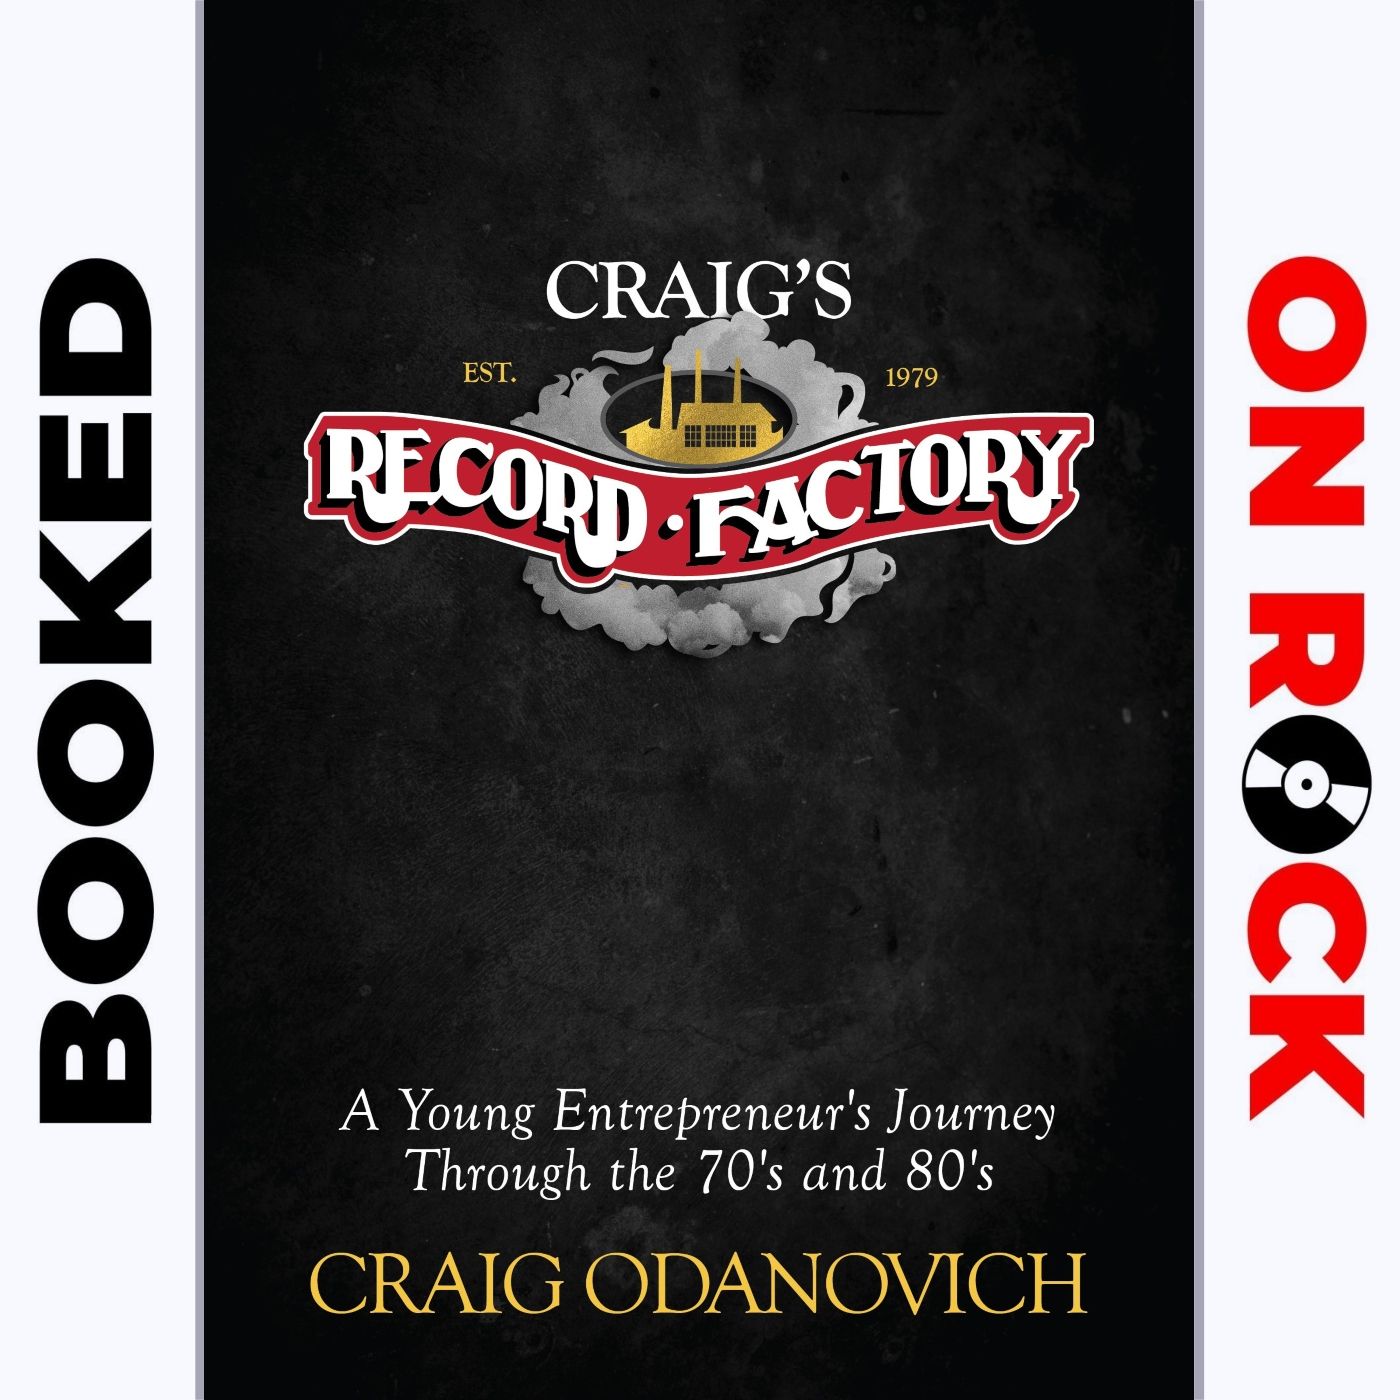 Episode 53 | Craig Odanovich [“Craig's Record Factory: A Young Entrepreneur's Journey Through the 70's and 80's”]